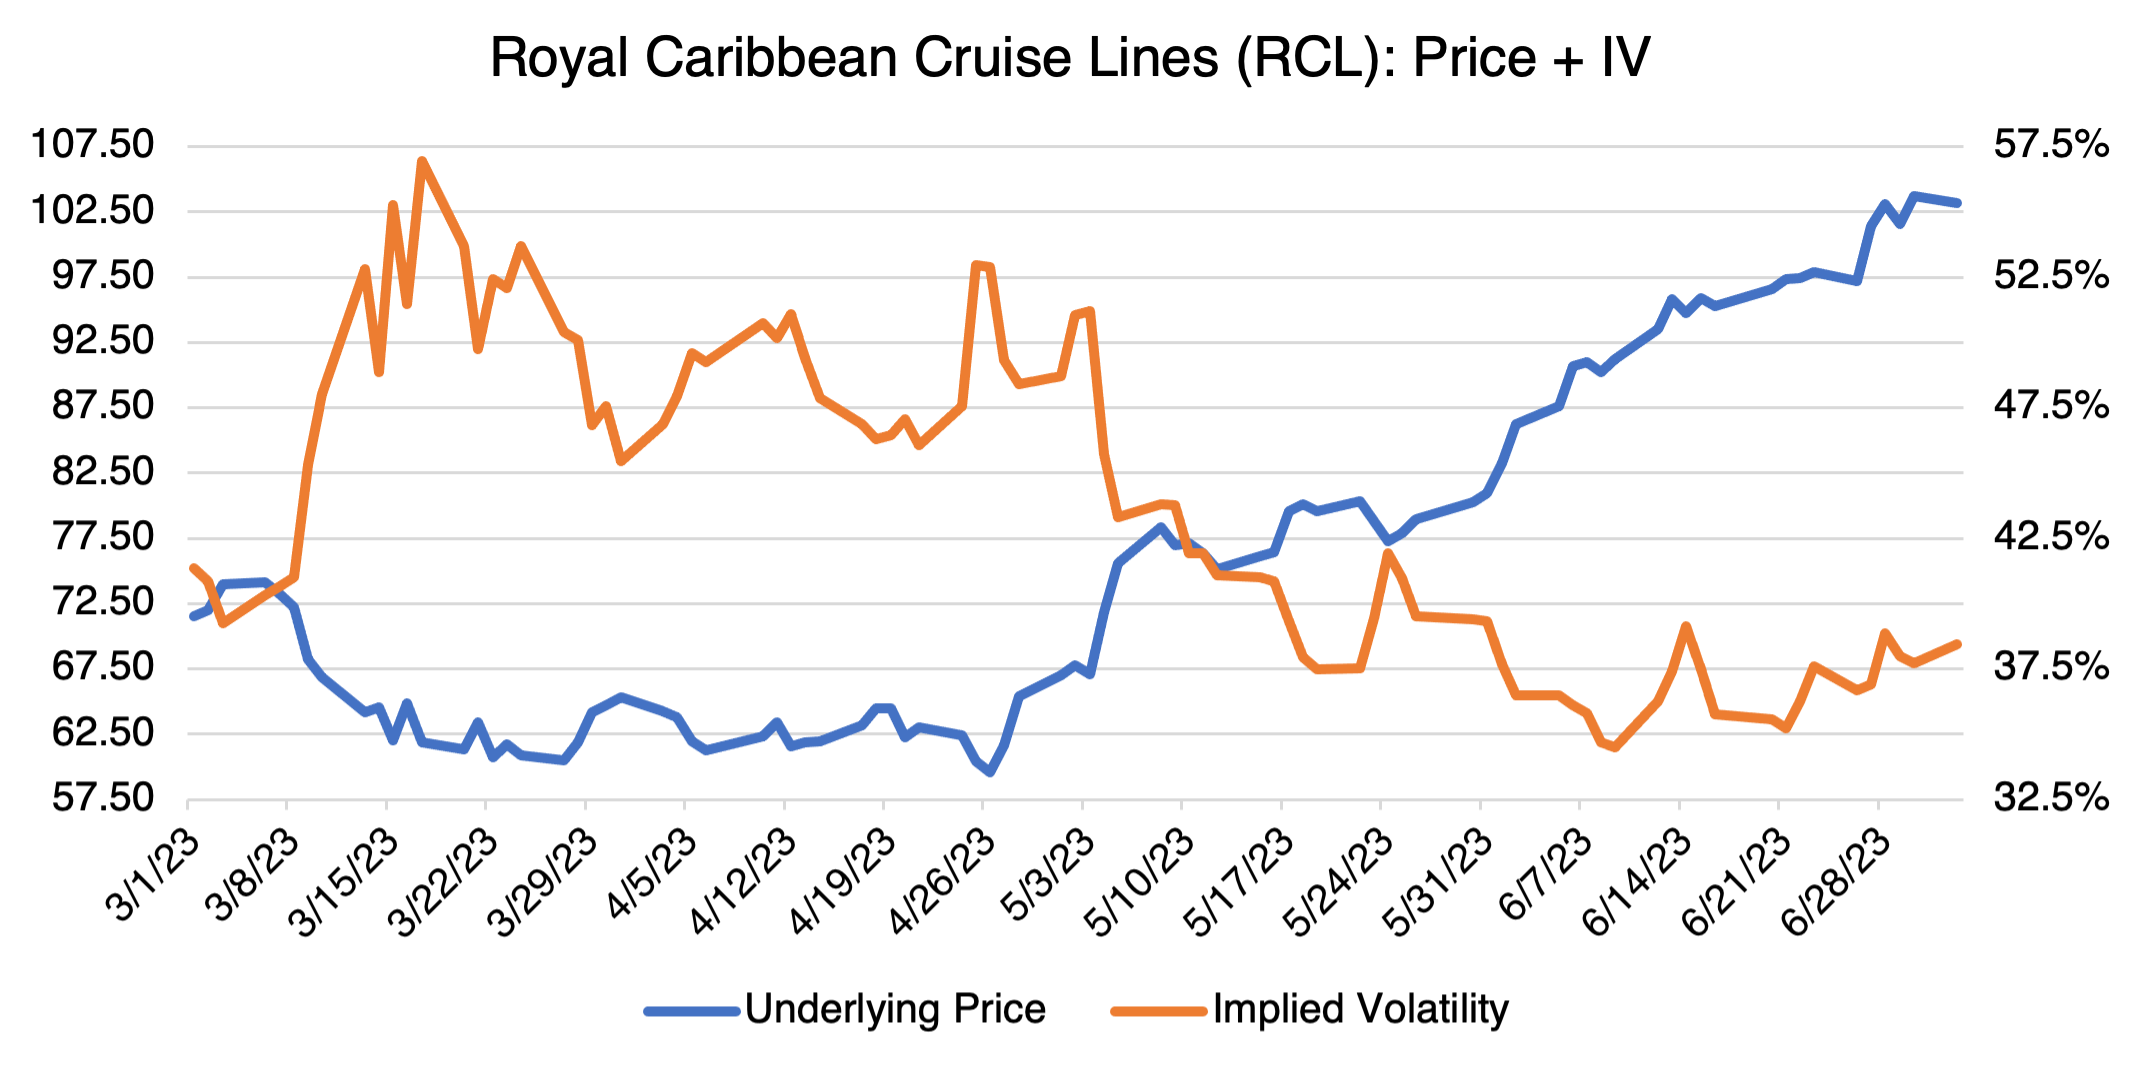 Royal Caribbean Cruise Lines (RCL): Price + IV